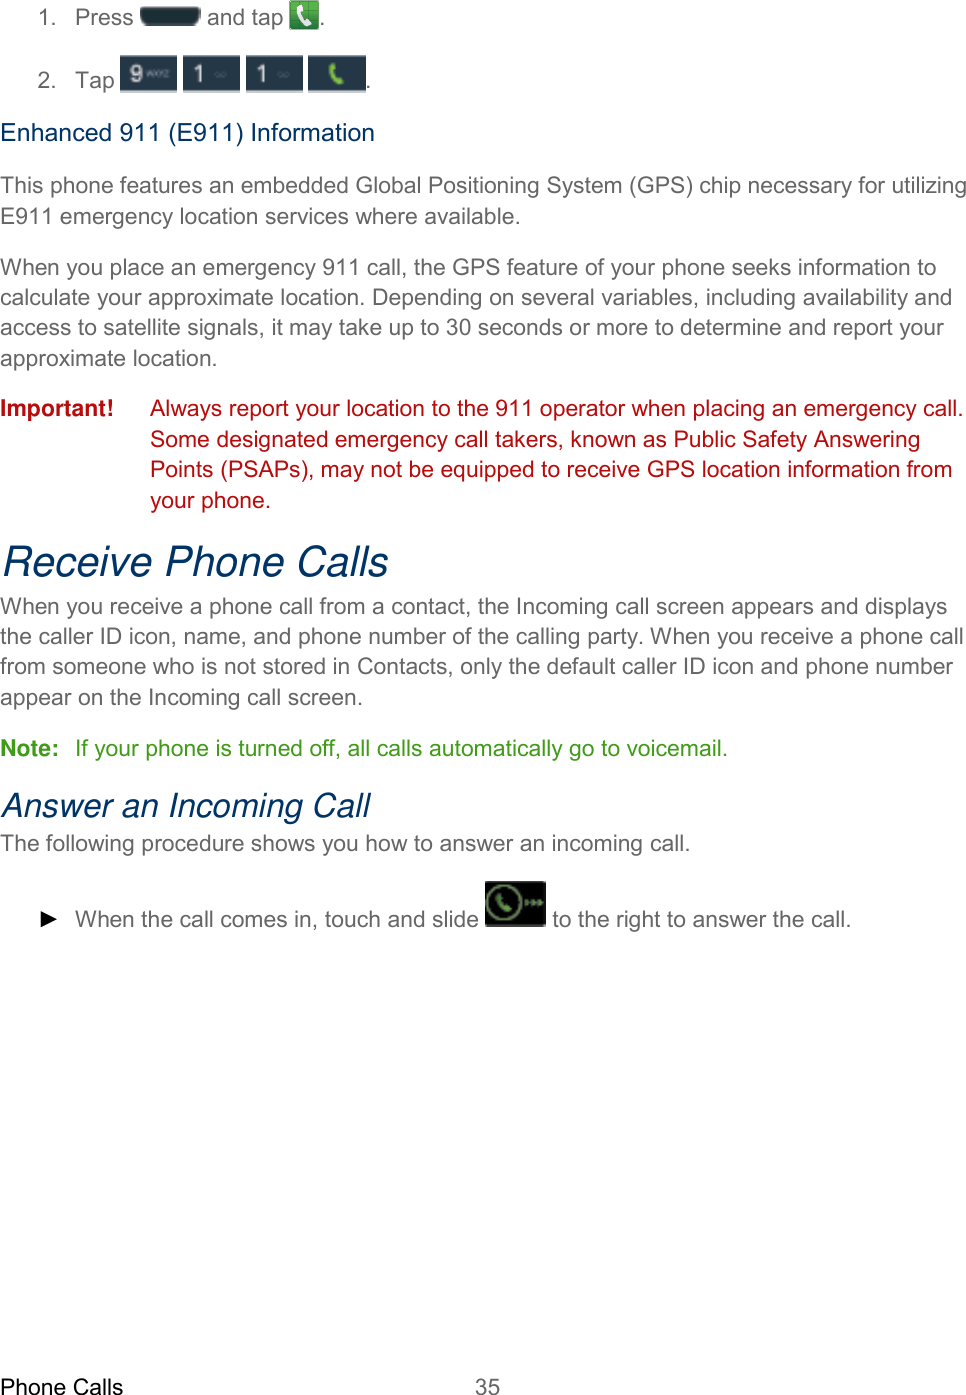 Phone Calls 35   1.  Press   and tap  . 2.  Tap        . Enhanced 911 (E911) Information This phone features an embedded Global Positioning System (GPS) chip necessary for utilizing E911 emergency location services where available. When you place an emergency 911 call, the GPS feature of your phone seeks information to calculate your approximate location. Depending on several variables, including availability and access to satellite signals, it may take up to 30 seconds or more to determine and report your approximate location. Important! Always report your location to the 911 operator when placing an emergency call. Some designated emergency call takers, known as Public Safety Answering Points (PSAPs), may not be equipped to receive GPS location information from your phone. Receive Phone Calls When you receive a phone call from a contact, the Incoming call screen appears and displays the caller ID icon, name, and phone number of the calling party. When you receive a phone call from someone who is not stored in Contacts, only the default caller ID icon and phone number appear on the Incoming call screen. Note:   If your phone is turned off, all calls automatically go to voicemail. Answer an Incoming Call The following procedure shows you how to answer an incoming call. ► When the call comes in, touch and slide   to the right to answer the call. 